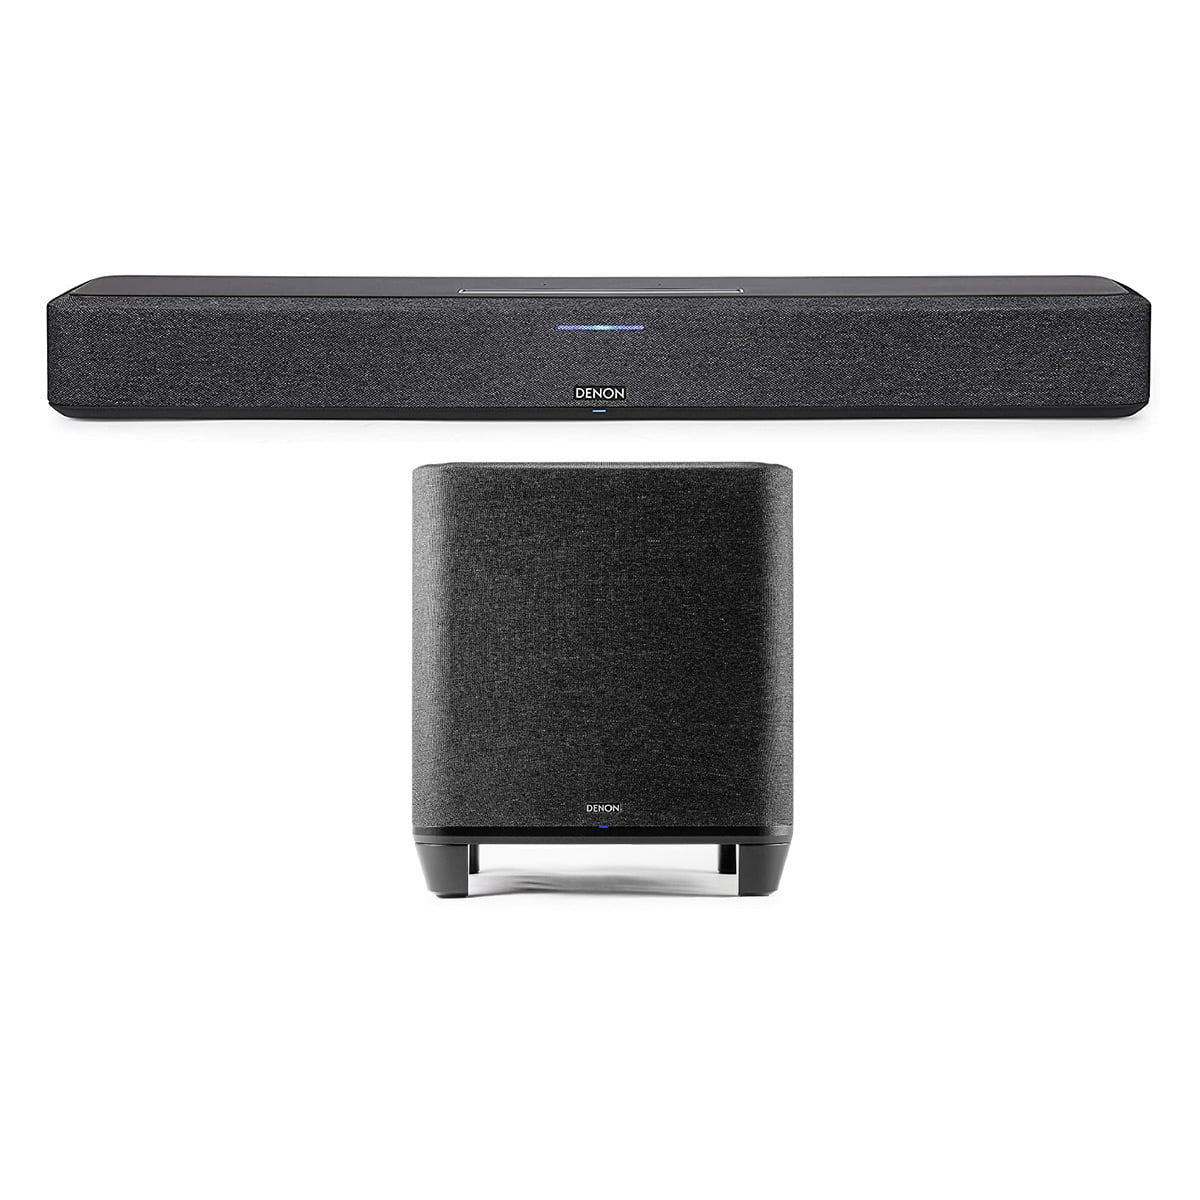 Denon Home Sound Bar 550 with Dolby Atmos and HEOS Built-in and Wireless Subwoofer with HEOS - Walmart.com